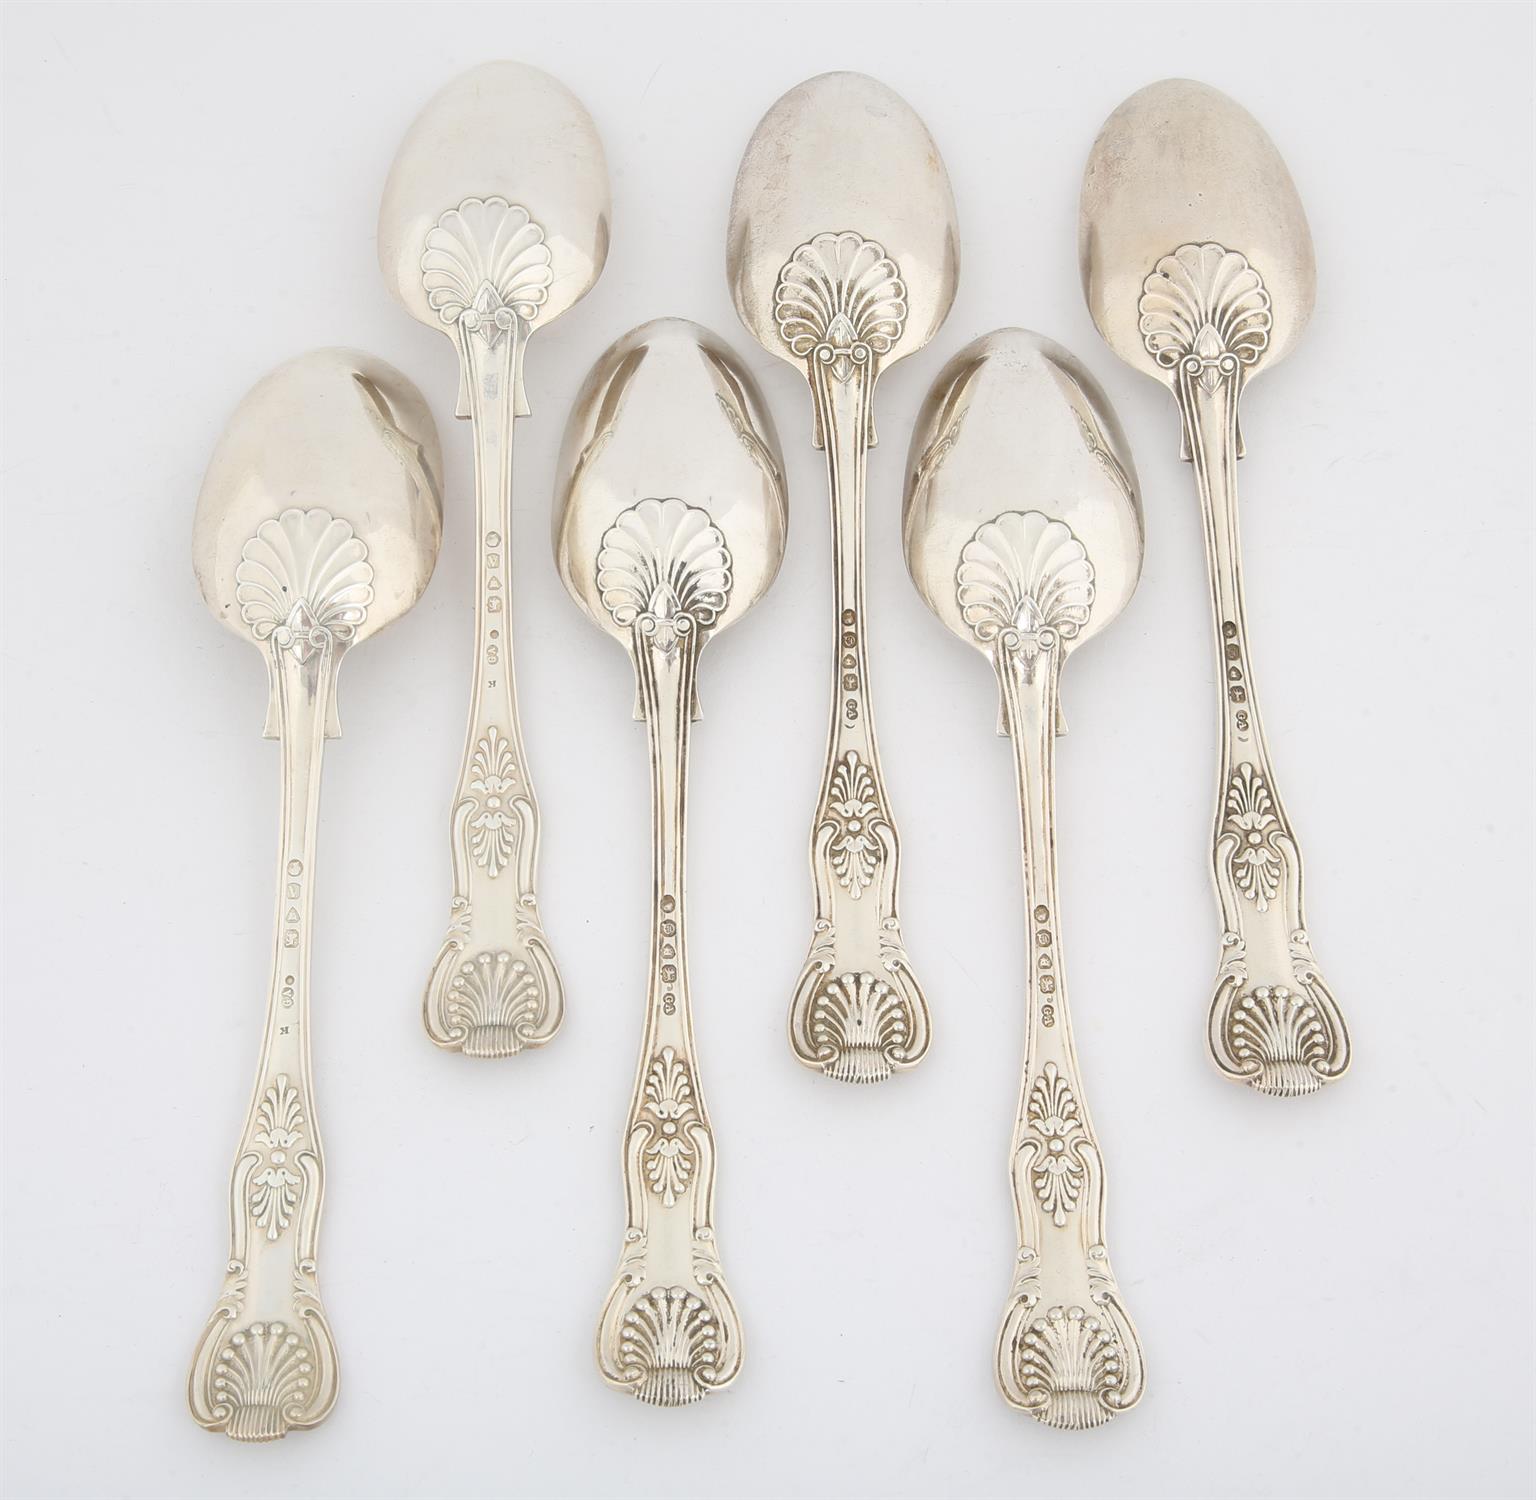 Matched kings pattern Victorian silver, double struck table spoons, two different dates, - Image 4 of 4